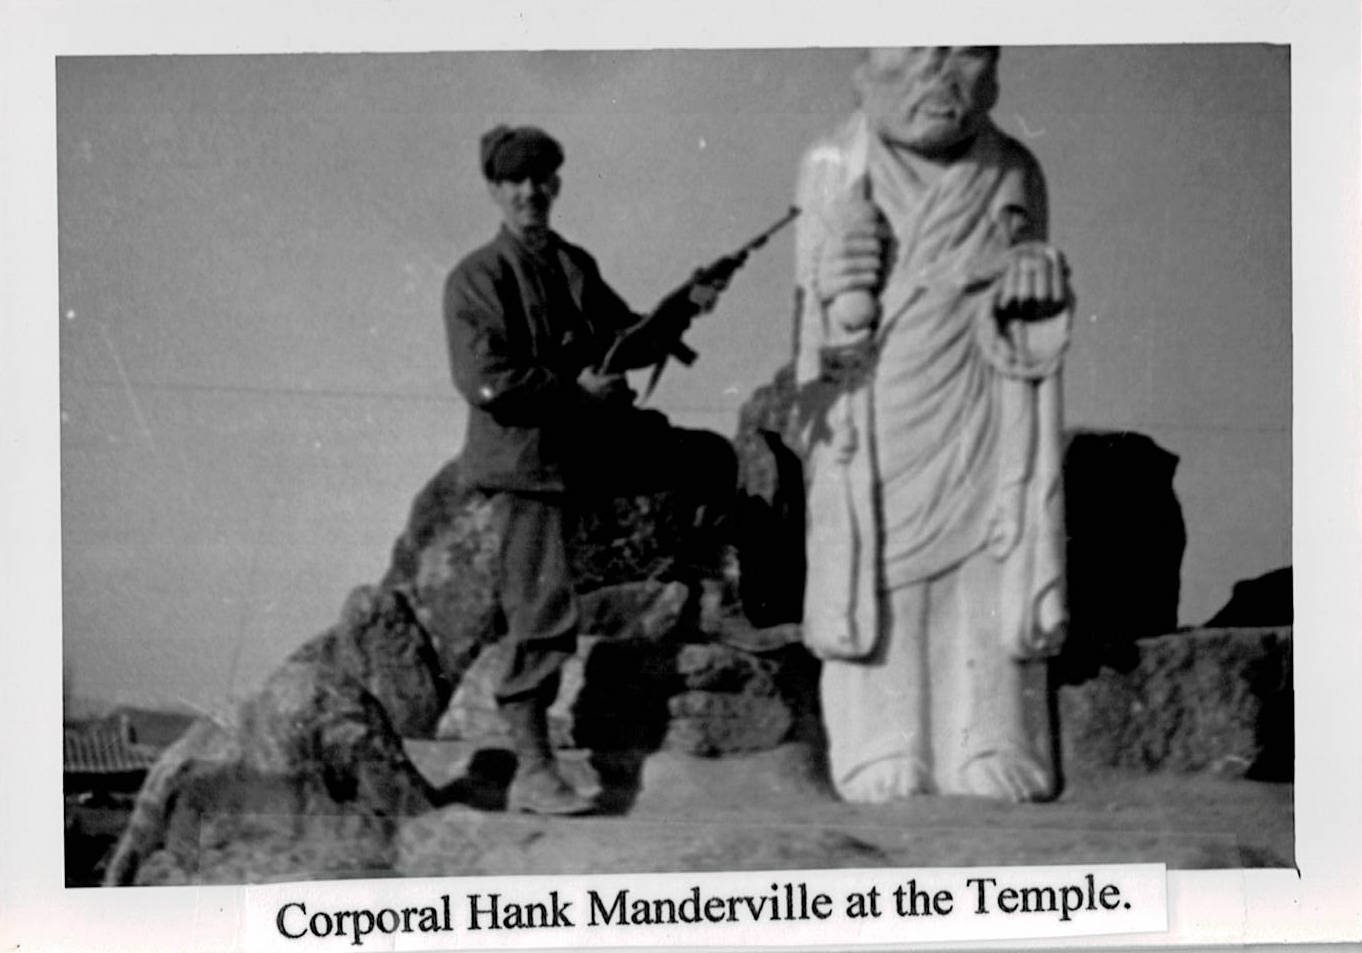 Corporal Hank Manderville at the Temple